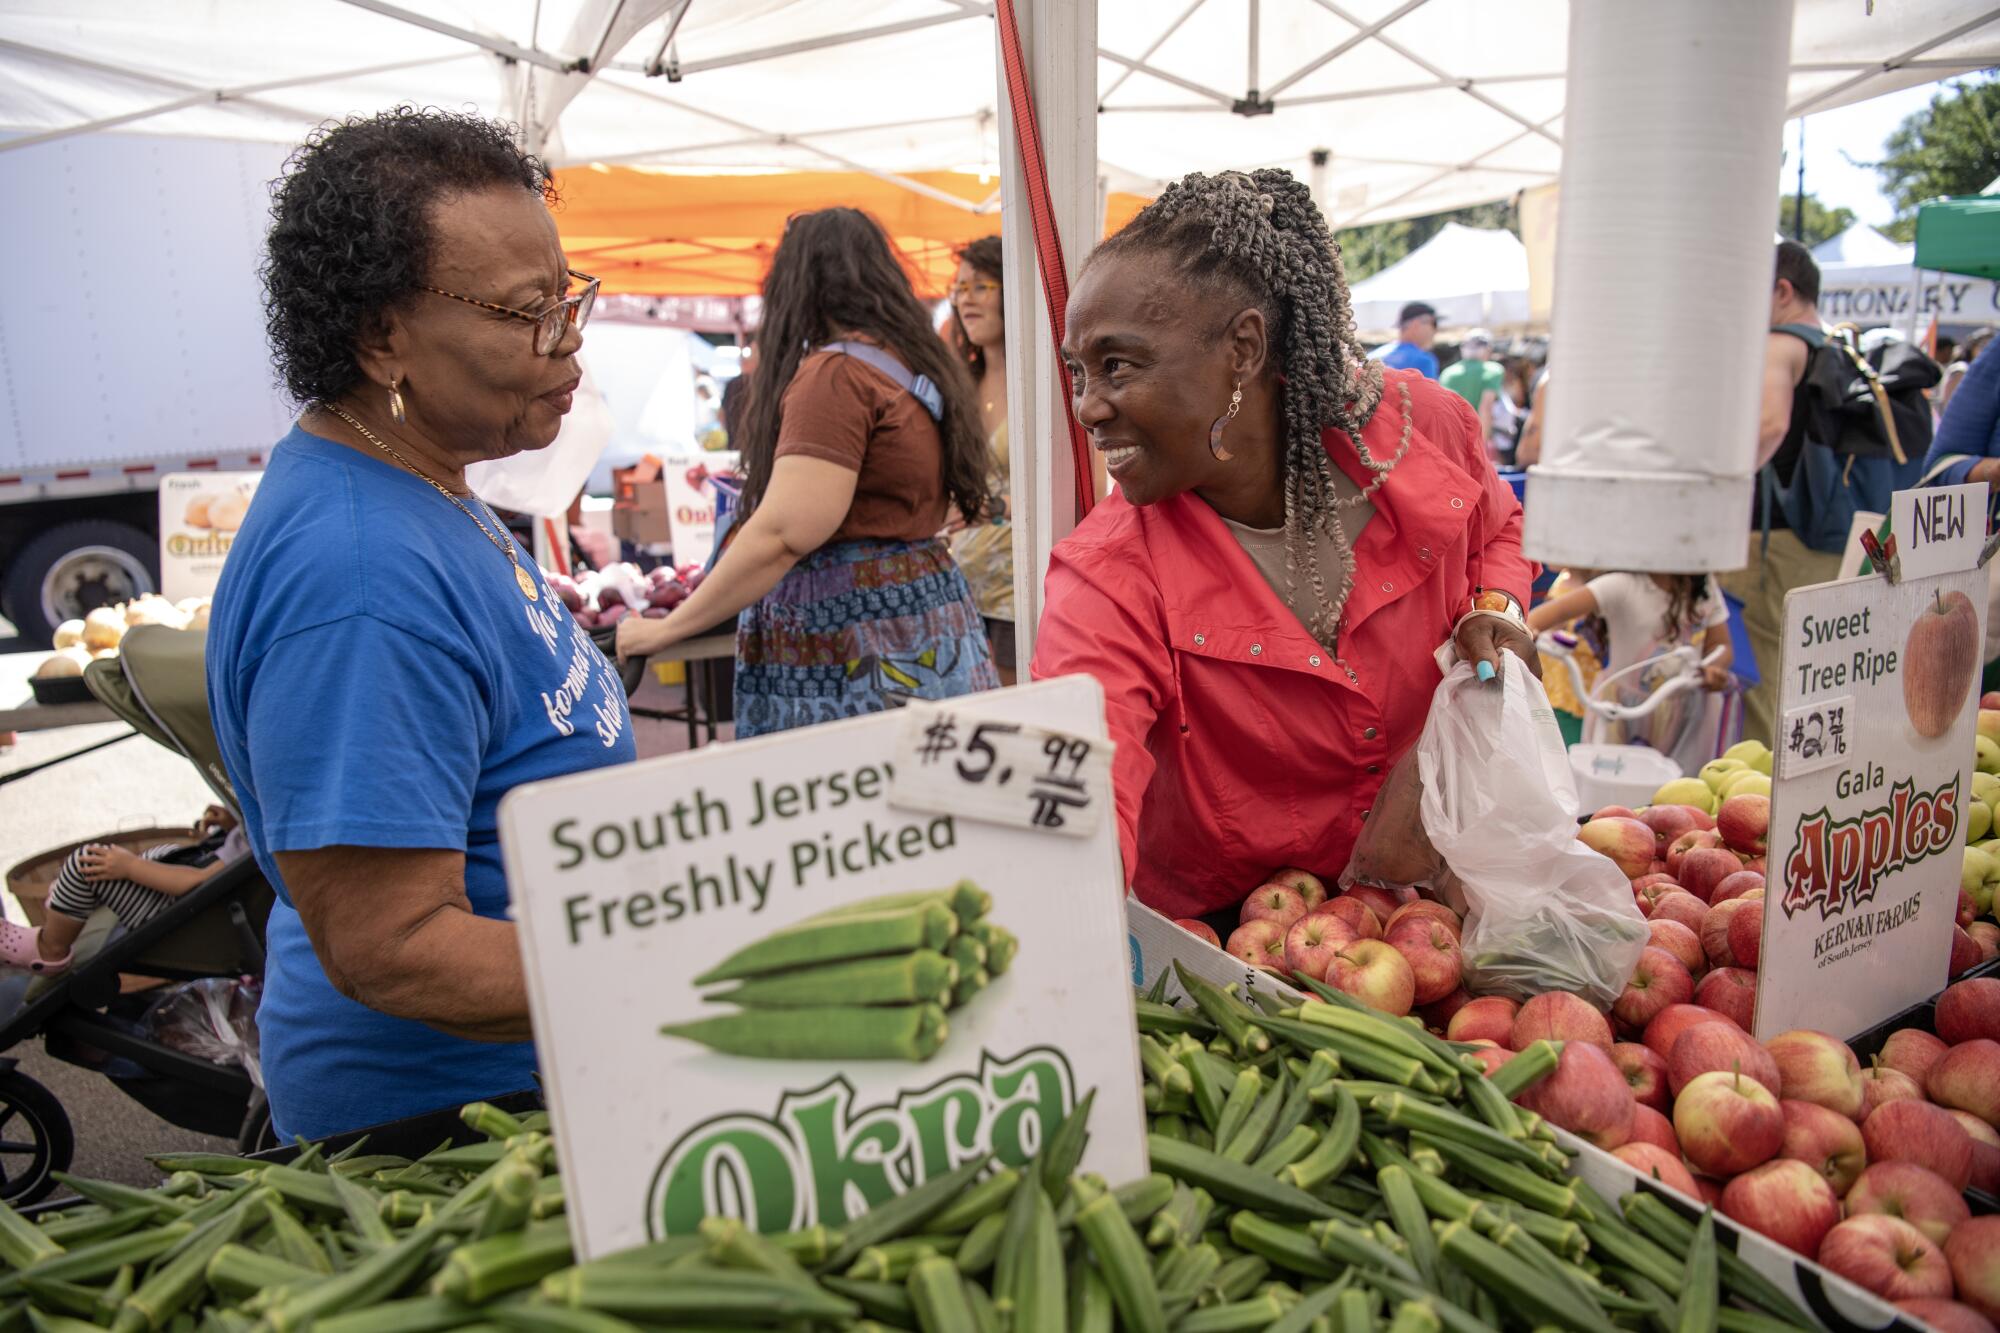 Two women talking at a farmers market, one holding a plastic produce bag and reaching into a pile of okra in the foreground